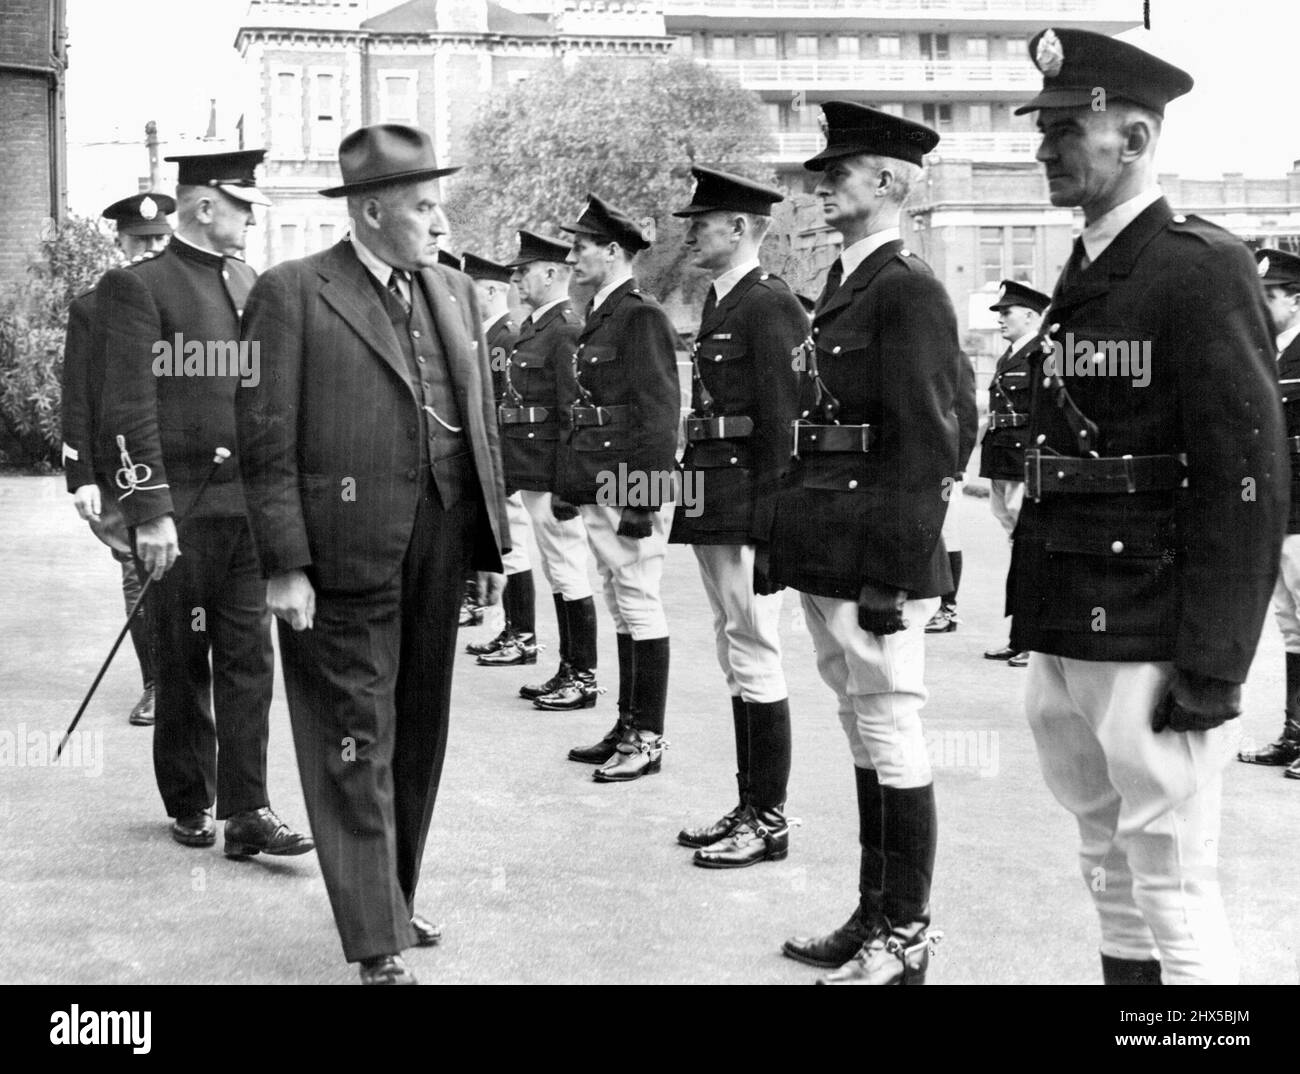 Victorian mounted police parade for an inspection by Commissioner Duncan of new style uniforms with which they were outfitted in 1947. September 25, 1947. Stock Photo